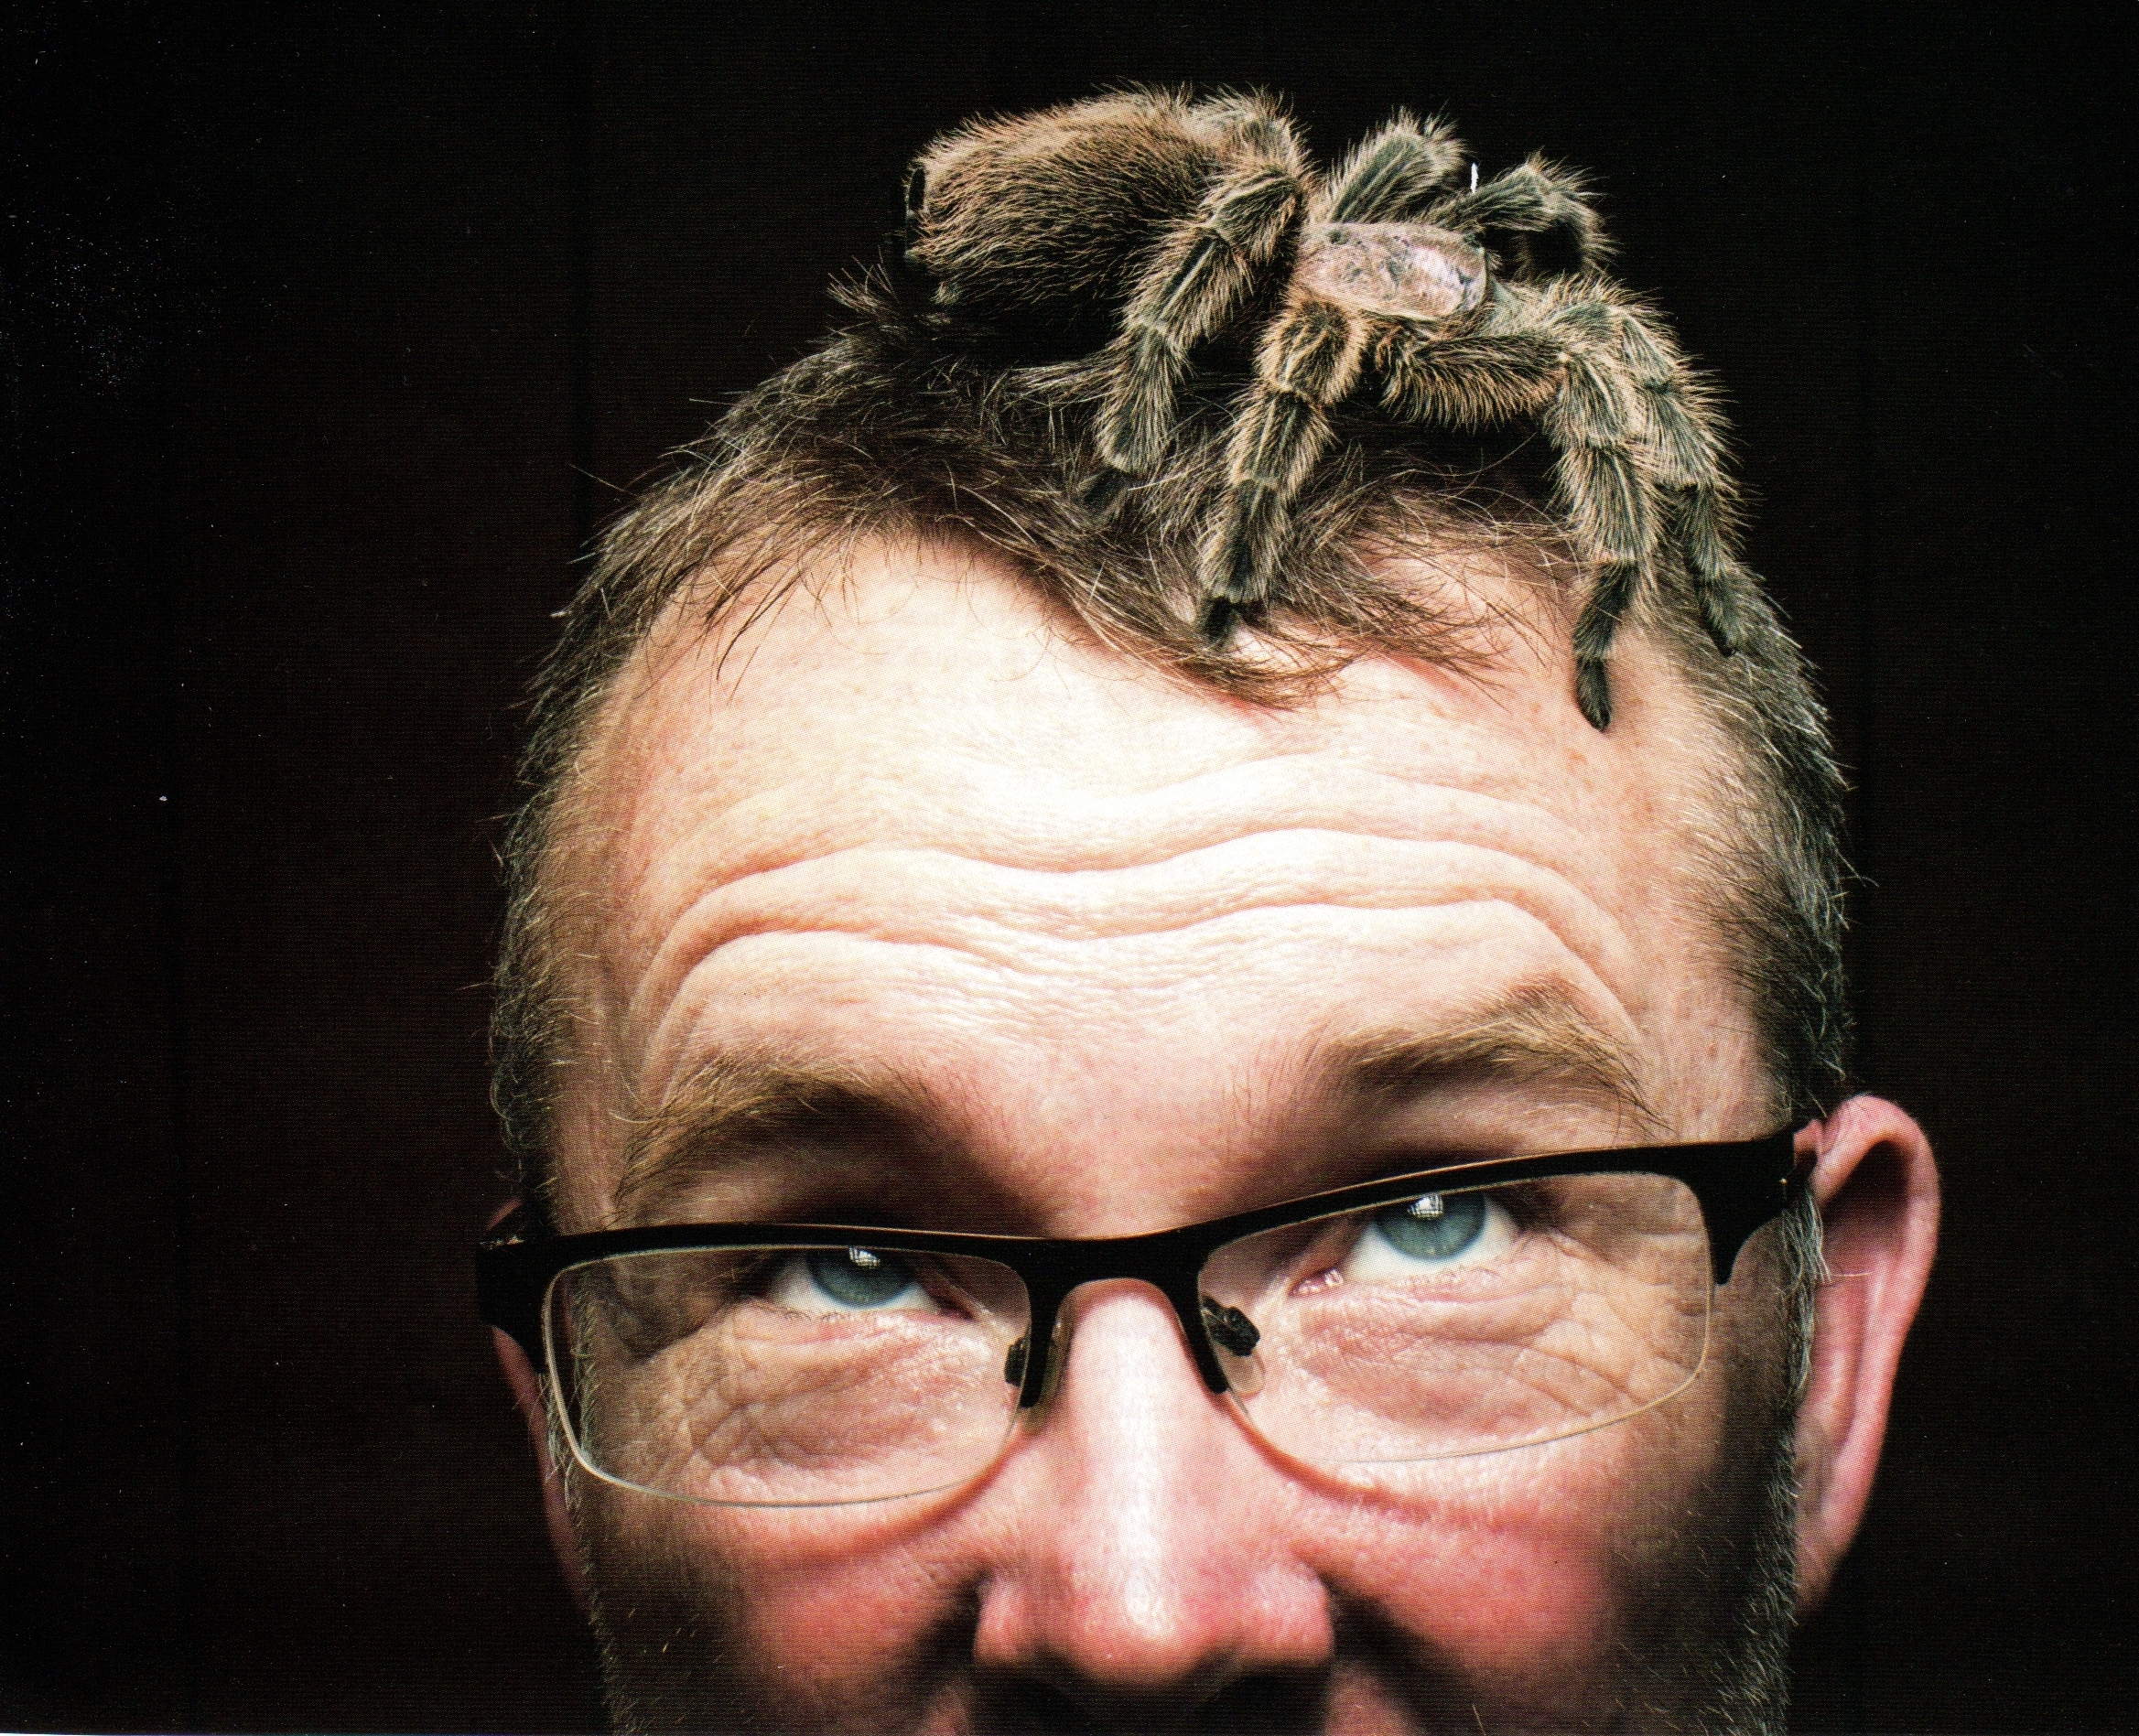 Critterman with a spider on his head